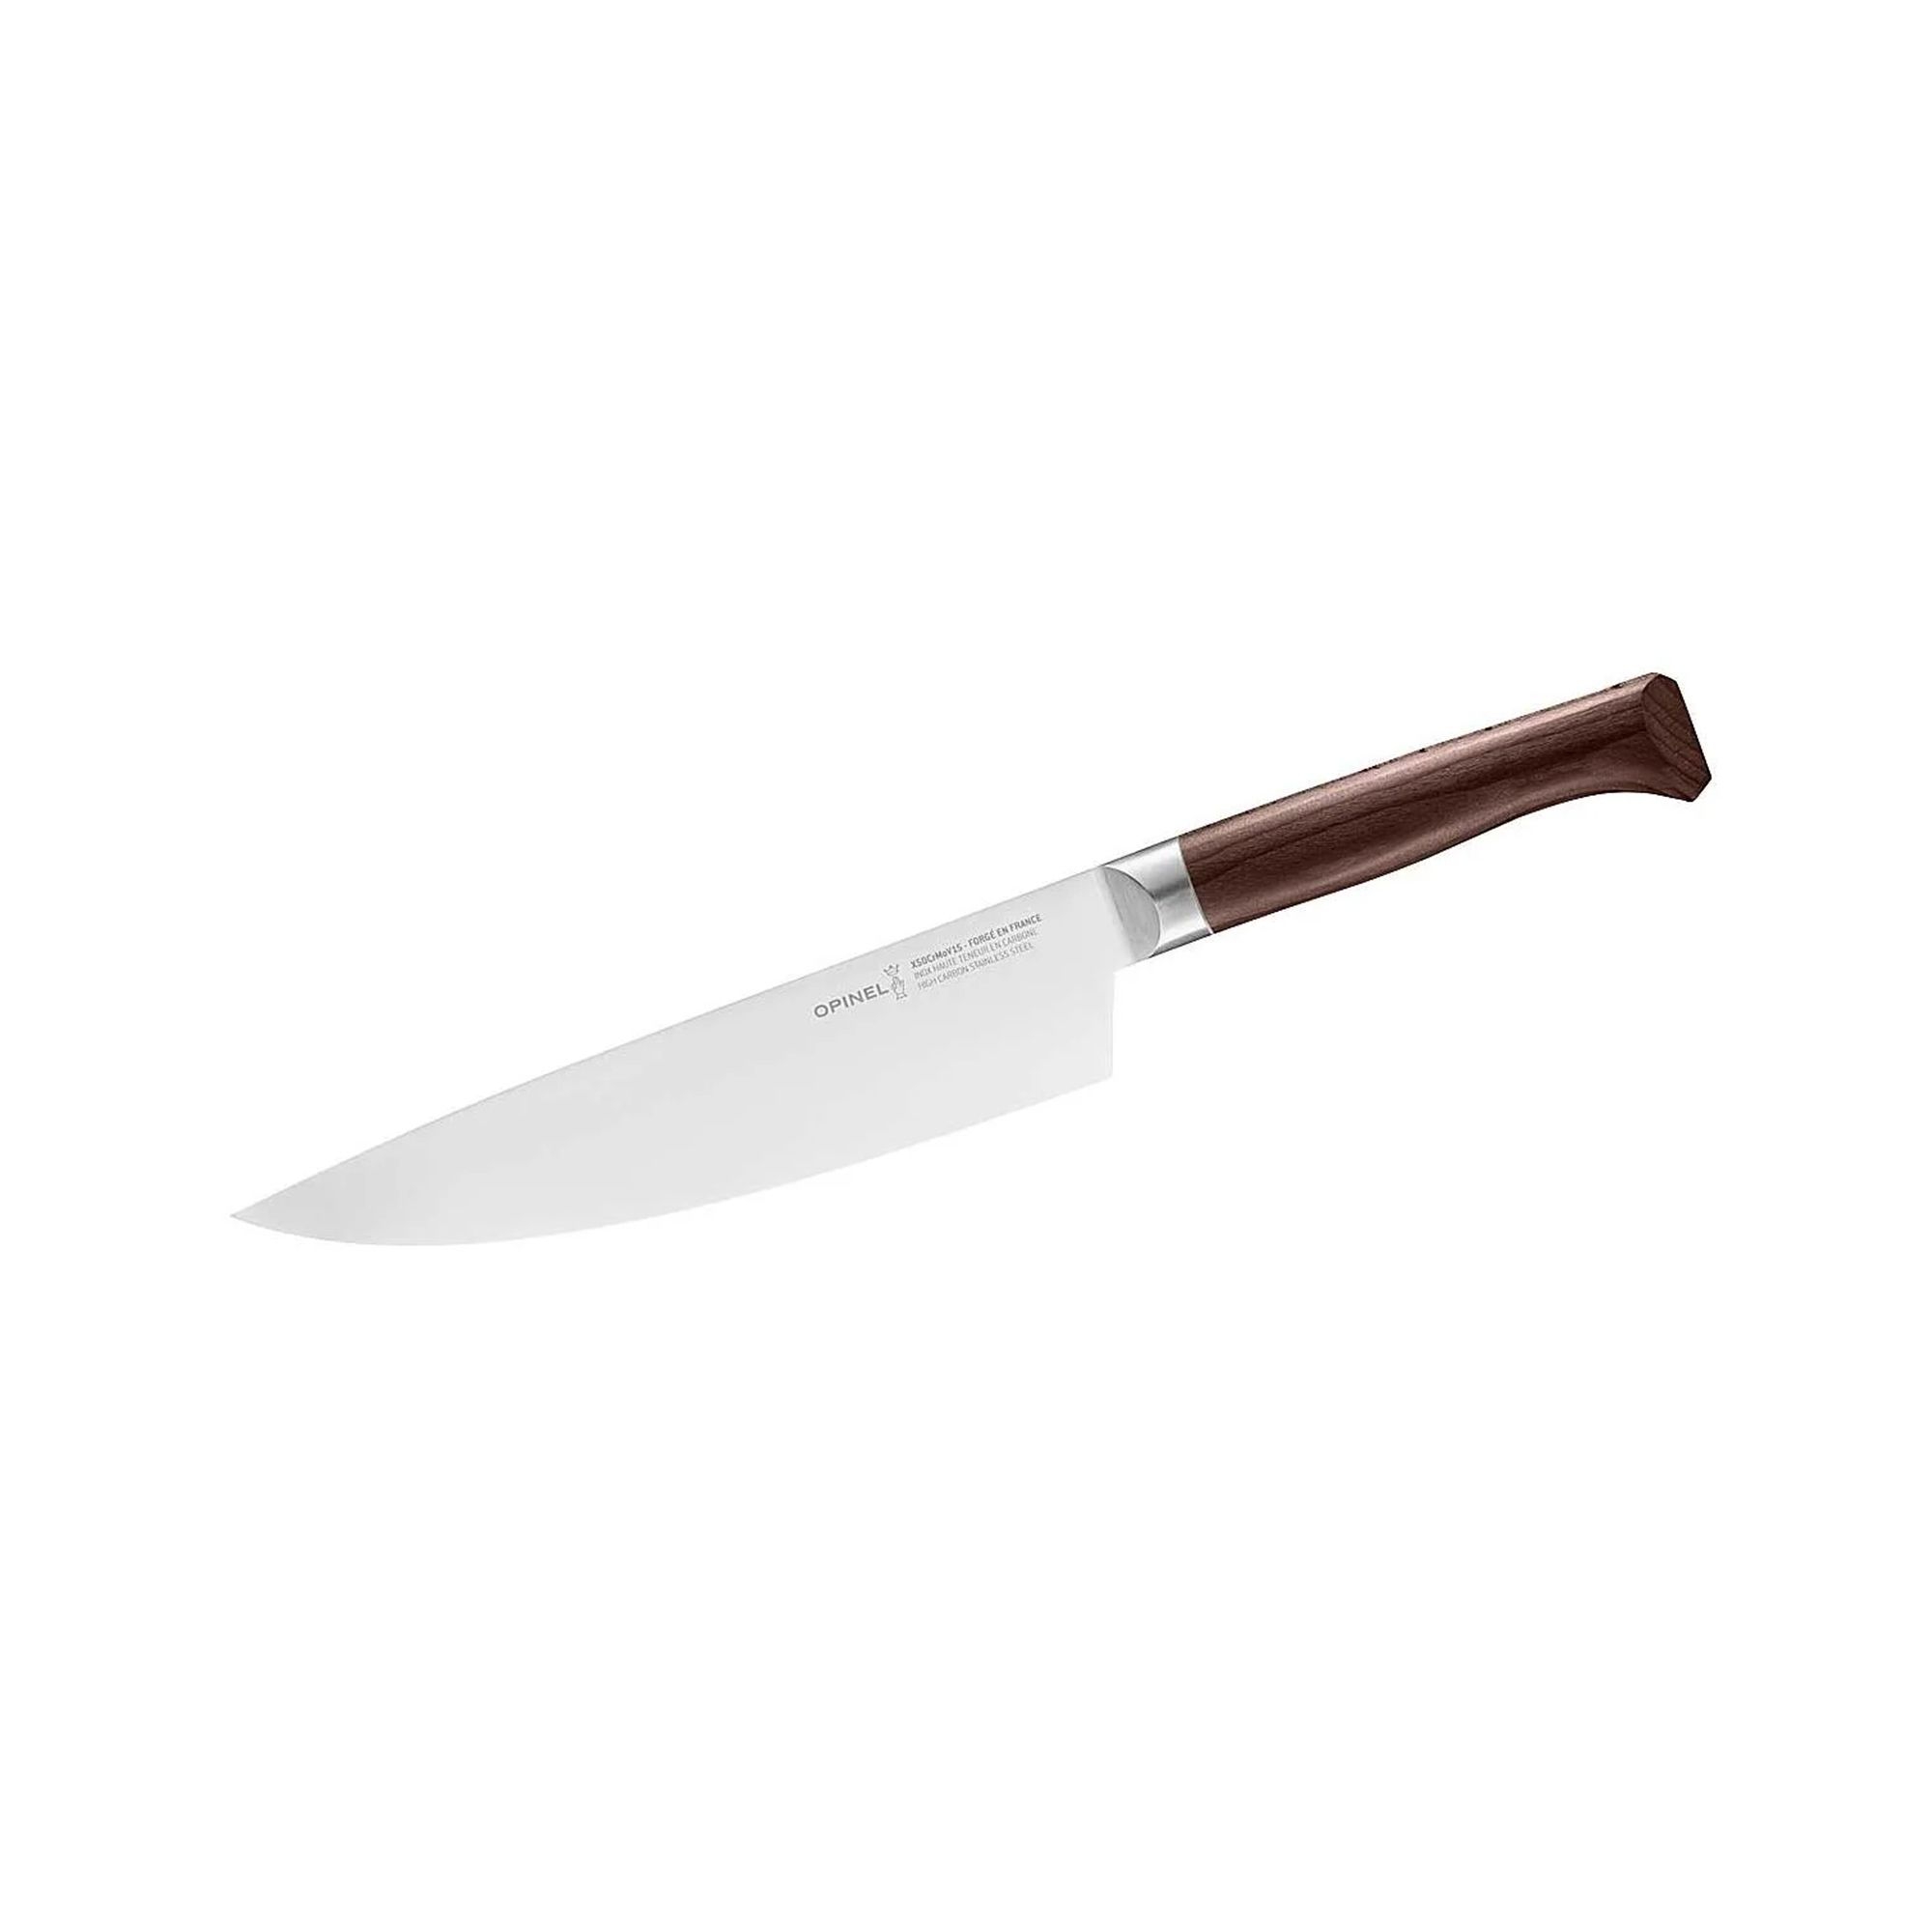 Opinel - FORGES 1890 - Chef's knife